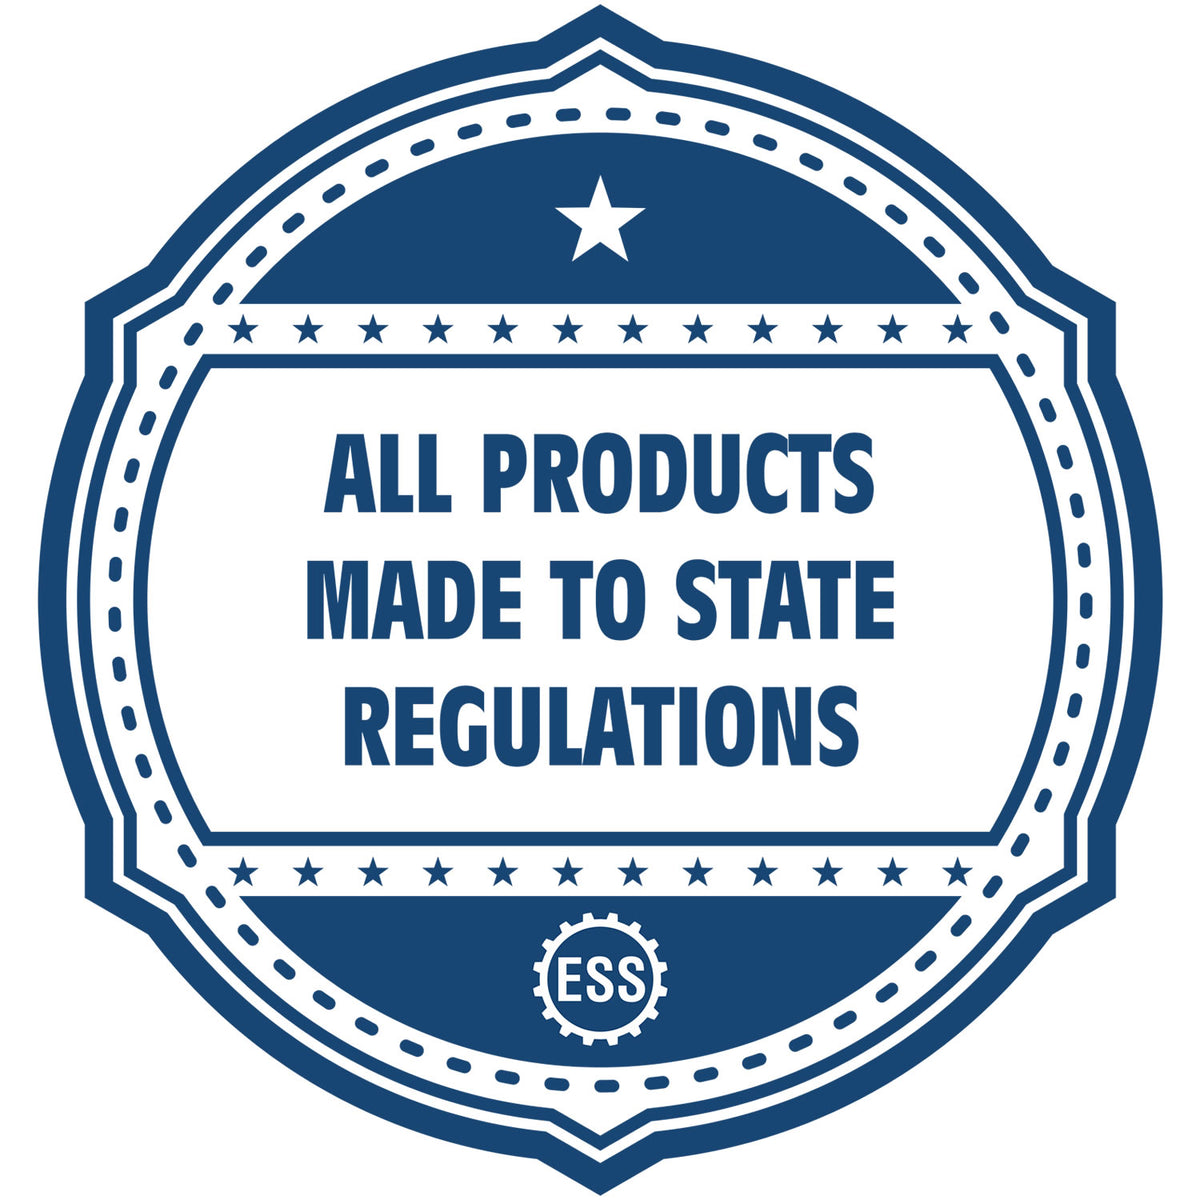 A blue icon or badge for the Slim Pre-Inked Maine Professional Geologist Seal Stamp showing that this product is made in compliance with state regulations.